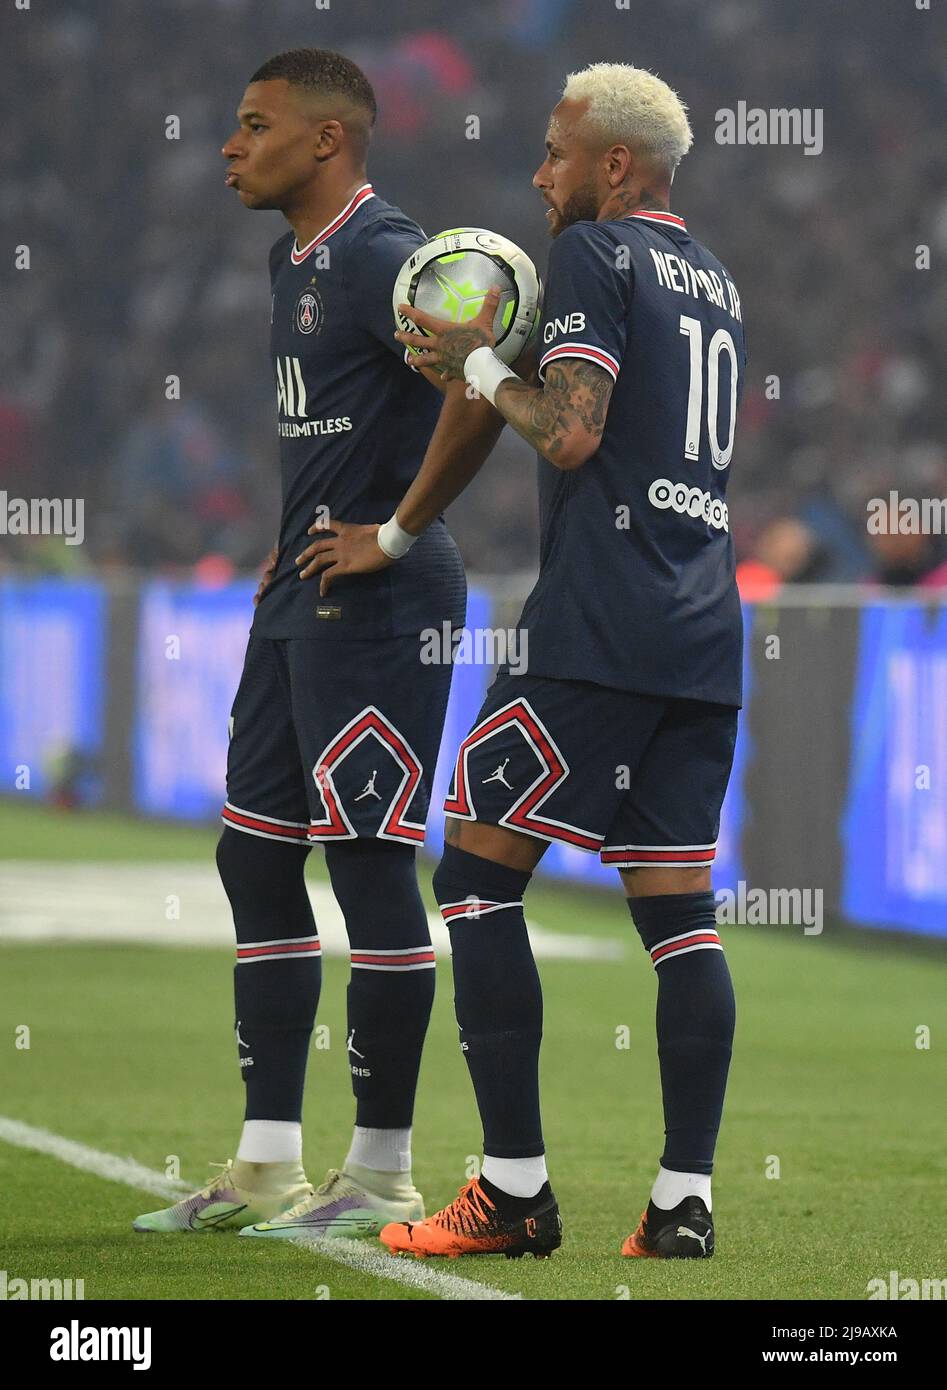 Paris Saint-Germain's Kylian Mbappé and Neymar during the French L1  football match between Paris Saint-Germain (PSG) and Metz at the Parc des  Princes stadium in Paris on May 21, 2022. Photo by